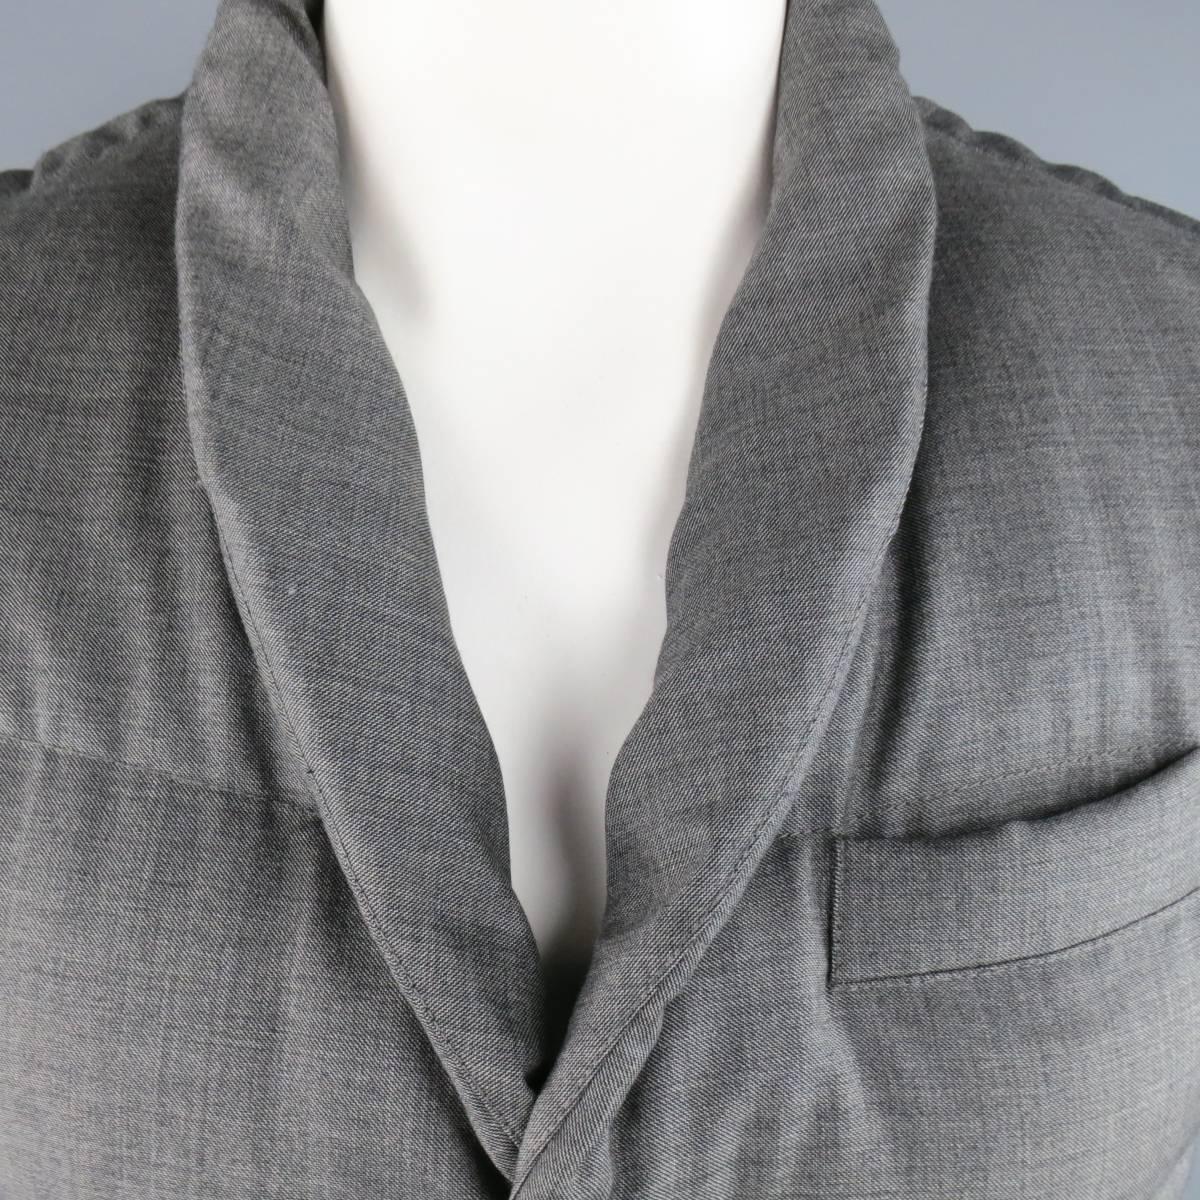 BRUNELLO CUCINELLI Puff Vest consists of wool material in a grey color tone. Designed in a high collar, 3-button front and quilted stitching. Detailed with top pocket and bottom flap pockets. Made in Italy.
 
Excellent Pre-Owned Condition
Marked